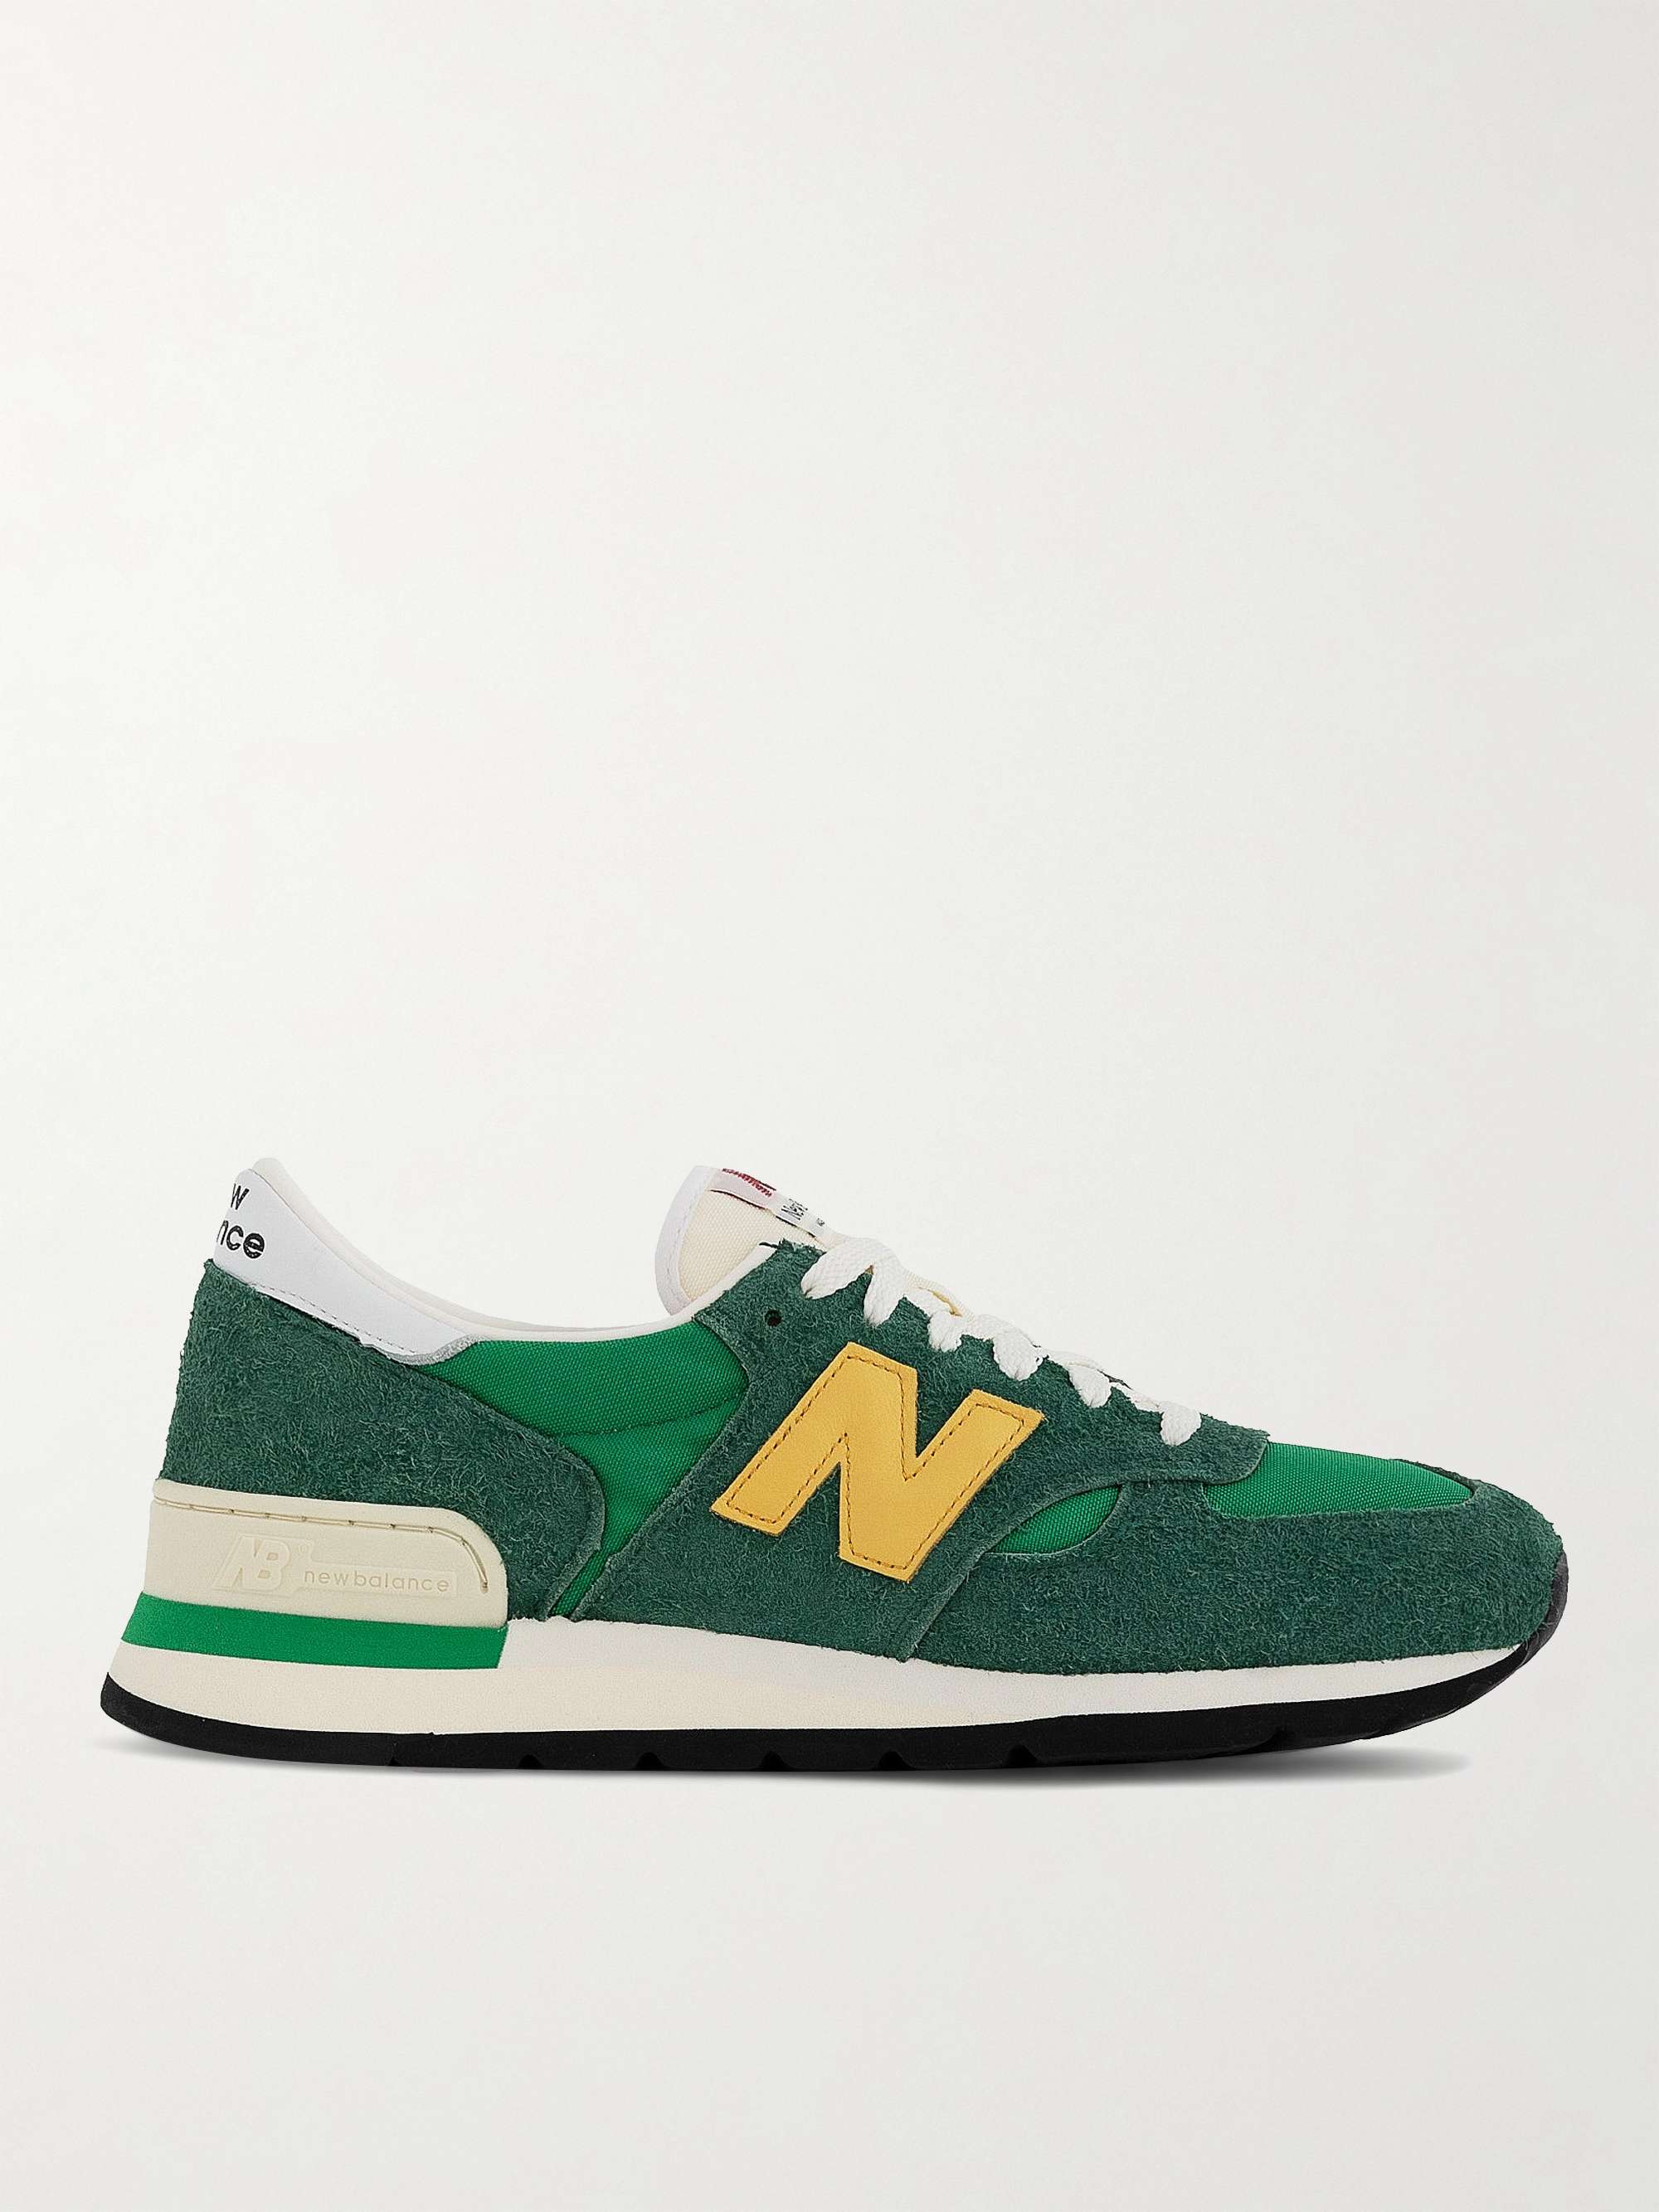 NEW BALANCE 990v1 Leather-Trimmed Mesh and Suede Sneakers | MR PORTER